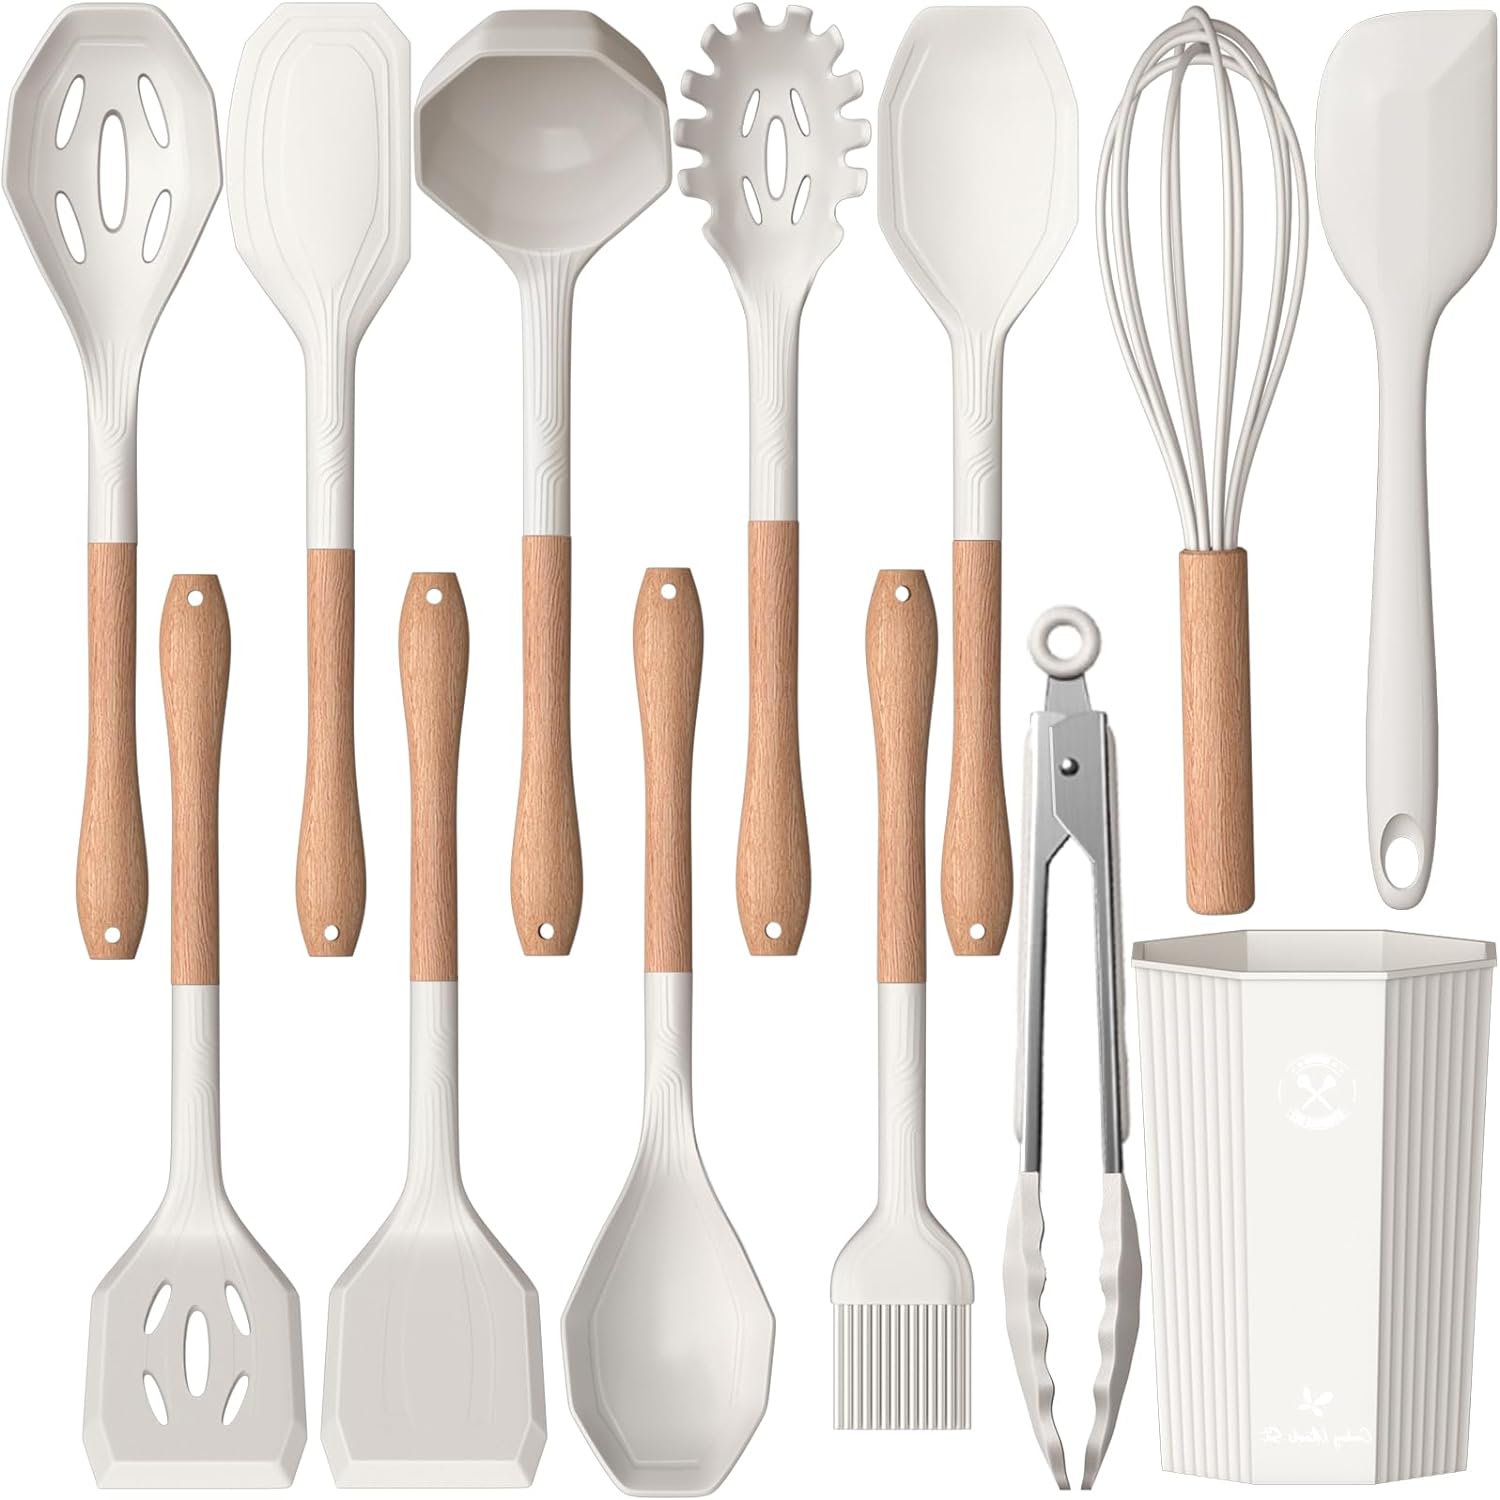 Kitchen Utensils Set- 13 Pcs Cooking Utensils with Tongs, Spoon Spatula &Turner Made of Heat Resistant Food Grade Silicone and Wooden Handles Kitchen Gadgets Tools Set for Nonstick Cookware (White)